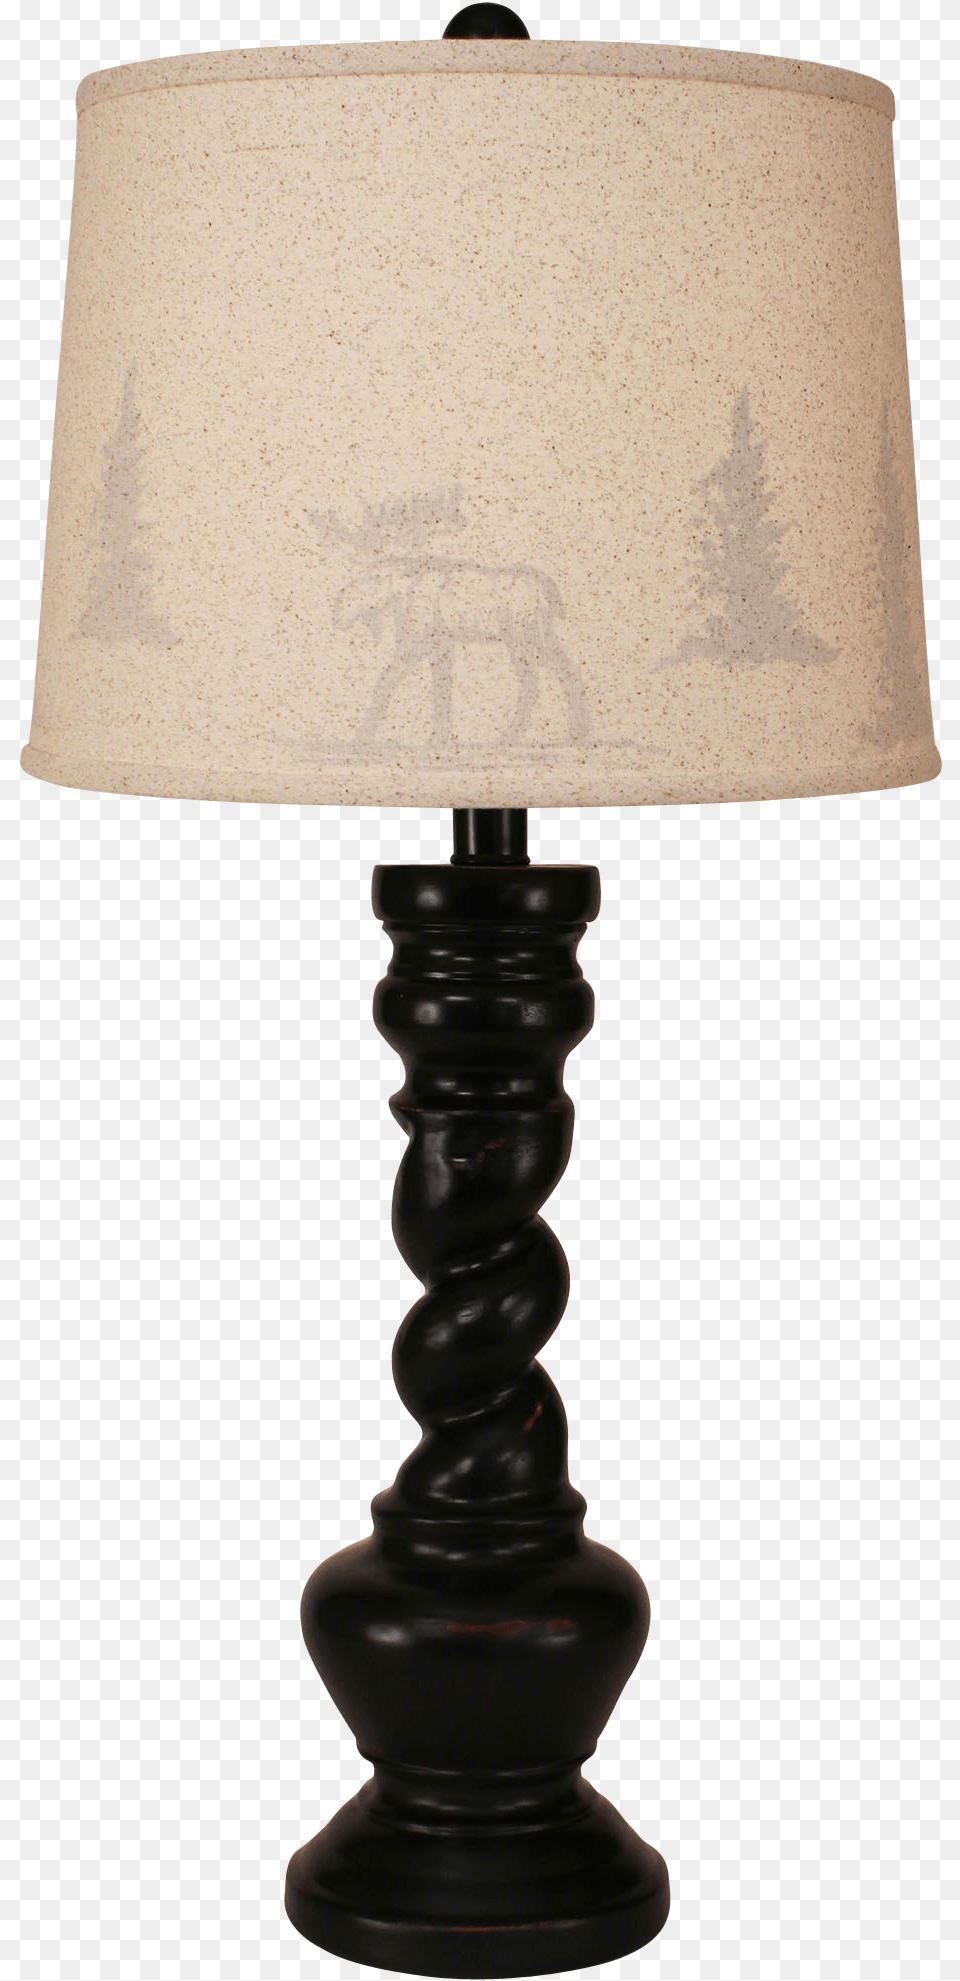 Distressed Black Quotbquot Pot With Twist Moose And Tree Coast Lamp Mfg Feather Tree With Twist 33quot Table Lamp, Lampshade, Table Lamp Png Image